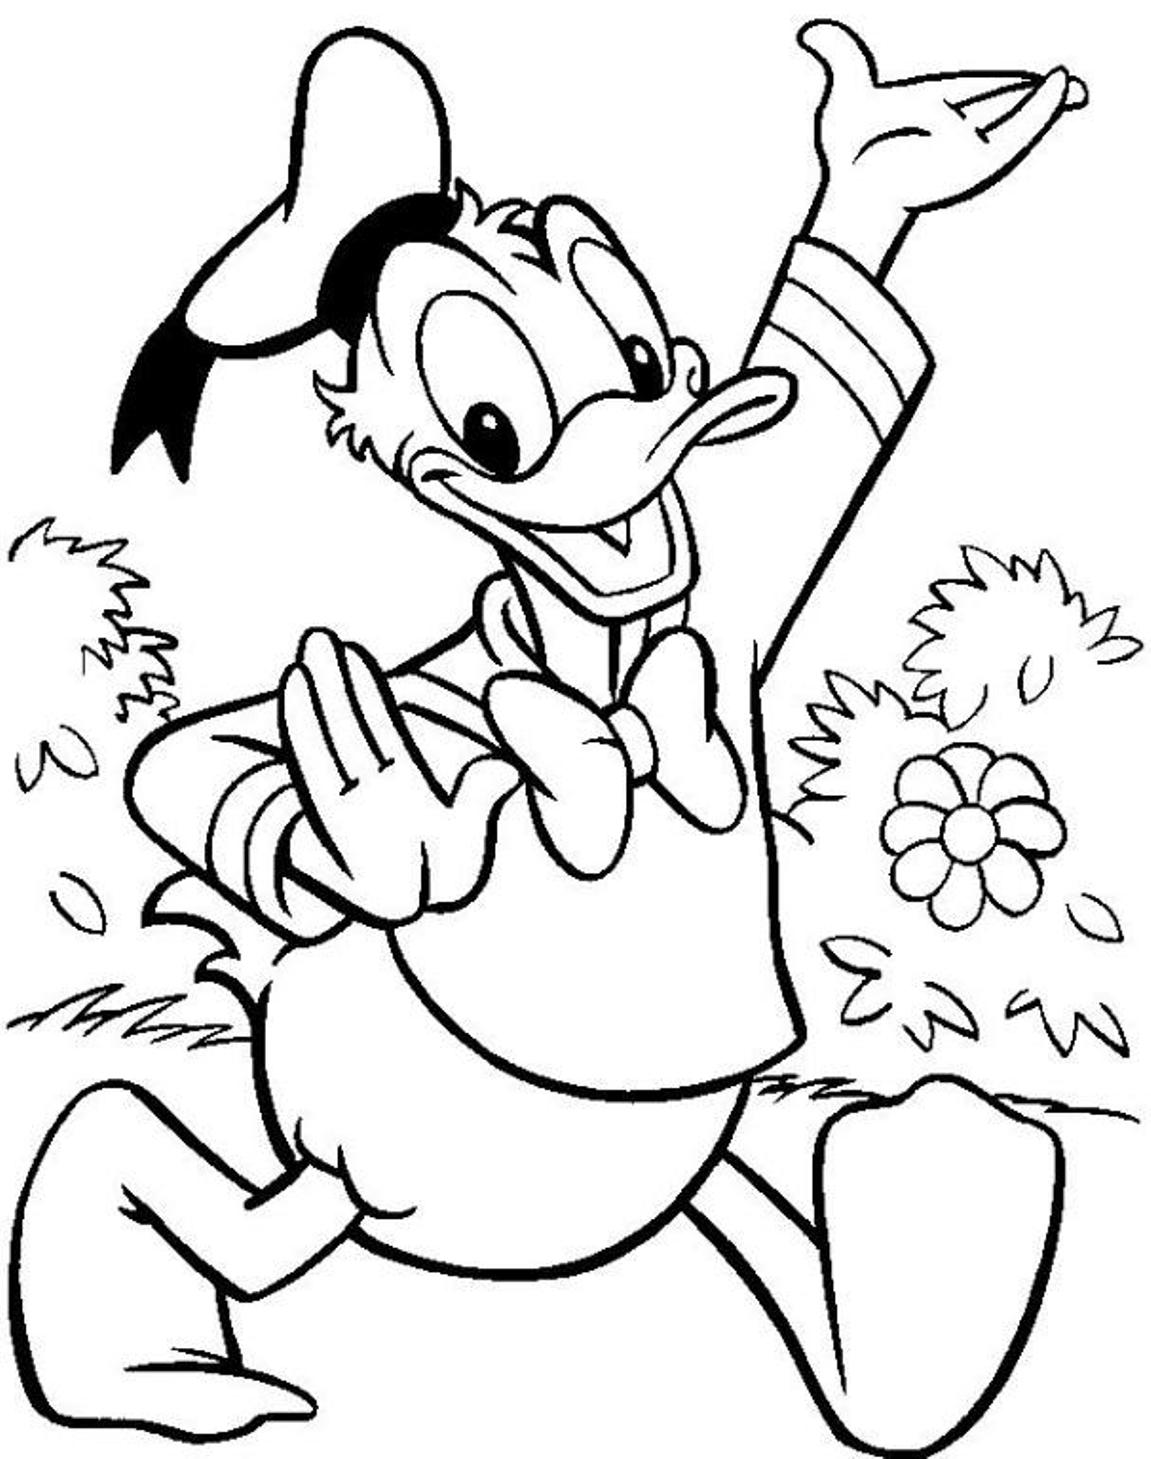 Entertaining Disney character Donald Duck 20 Donald Duck coloring pages